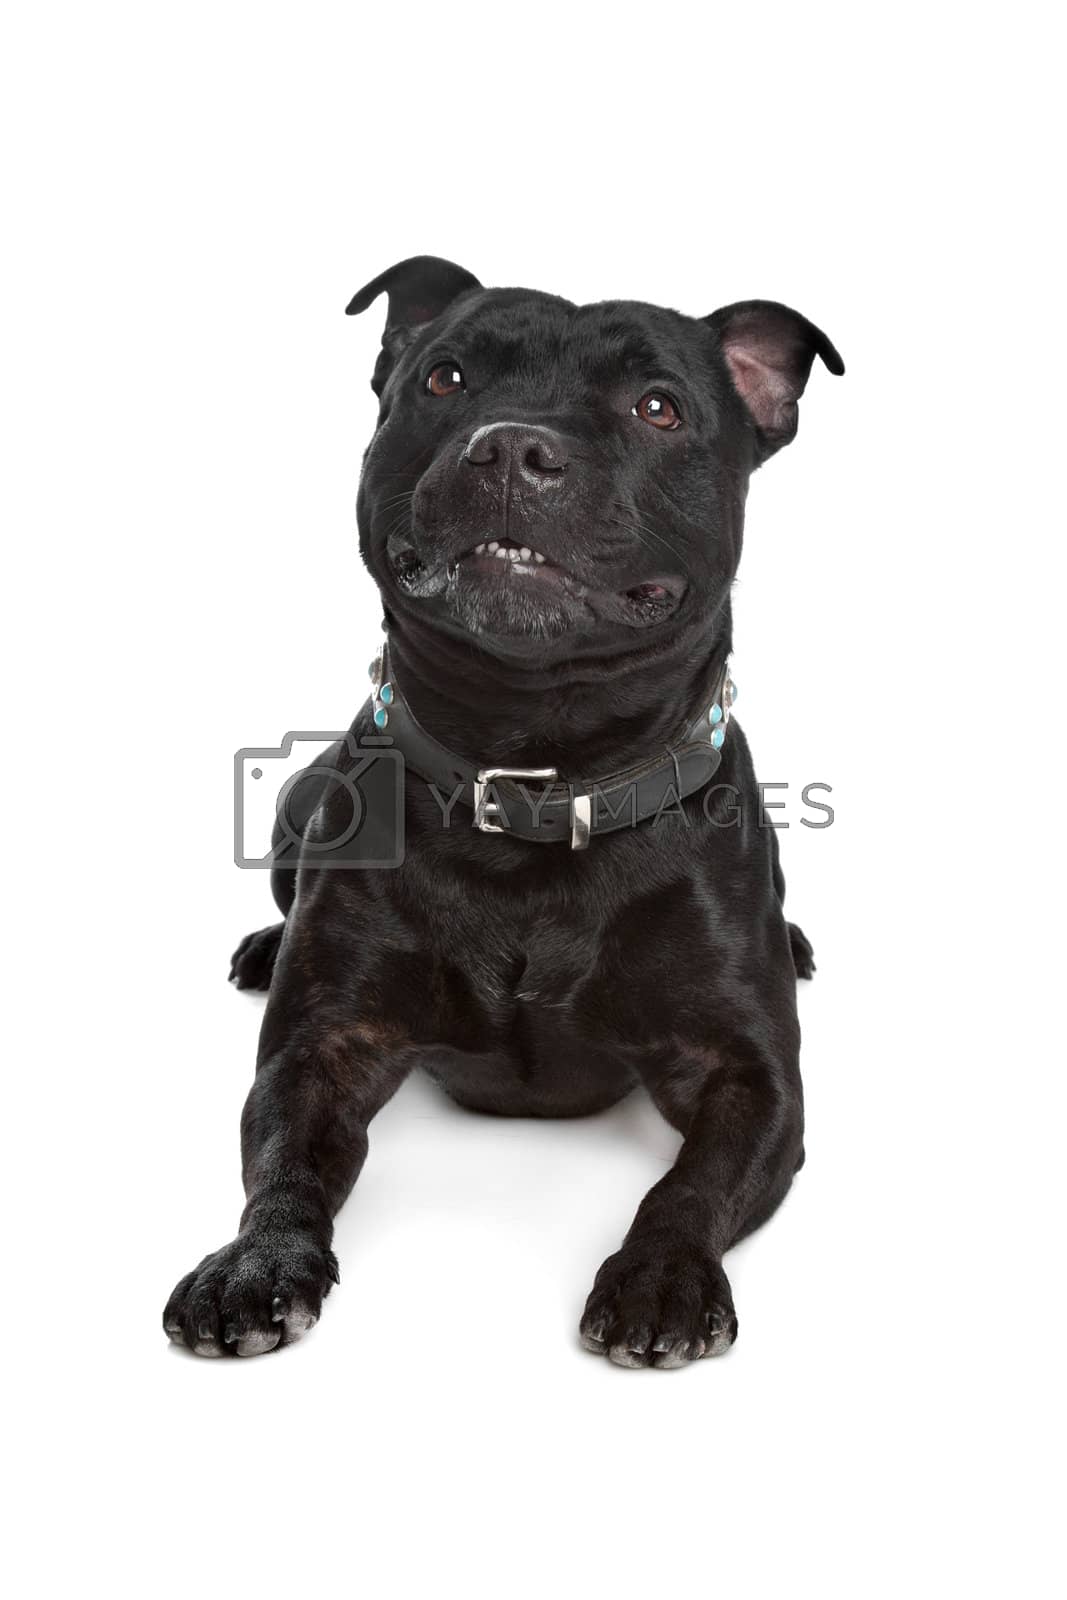 Royalty free image of Staffordshire Bull Terrier by eriklam